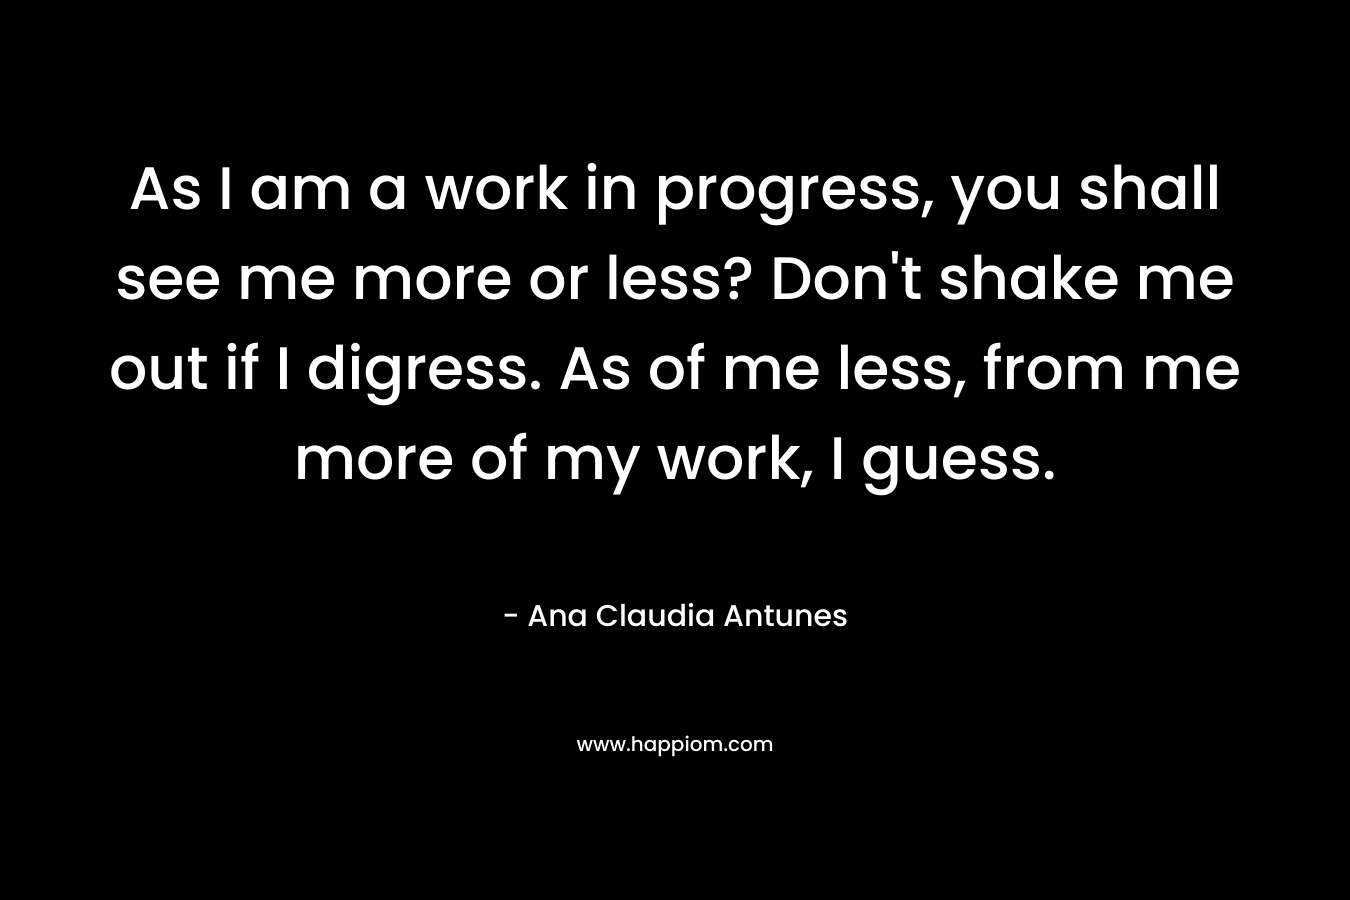 As I am a work in progress, you shall see me more or less? Don't shake me out if I digress. As of me less, from me more of my work, I guess.